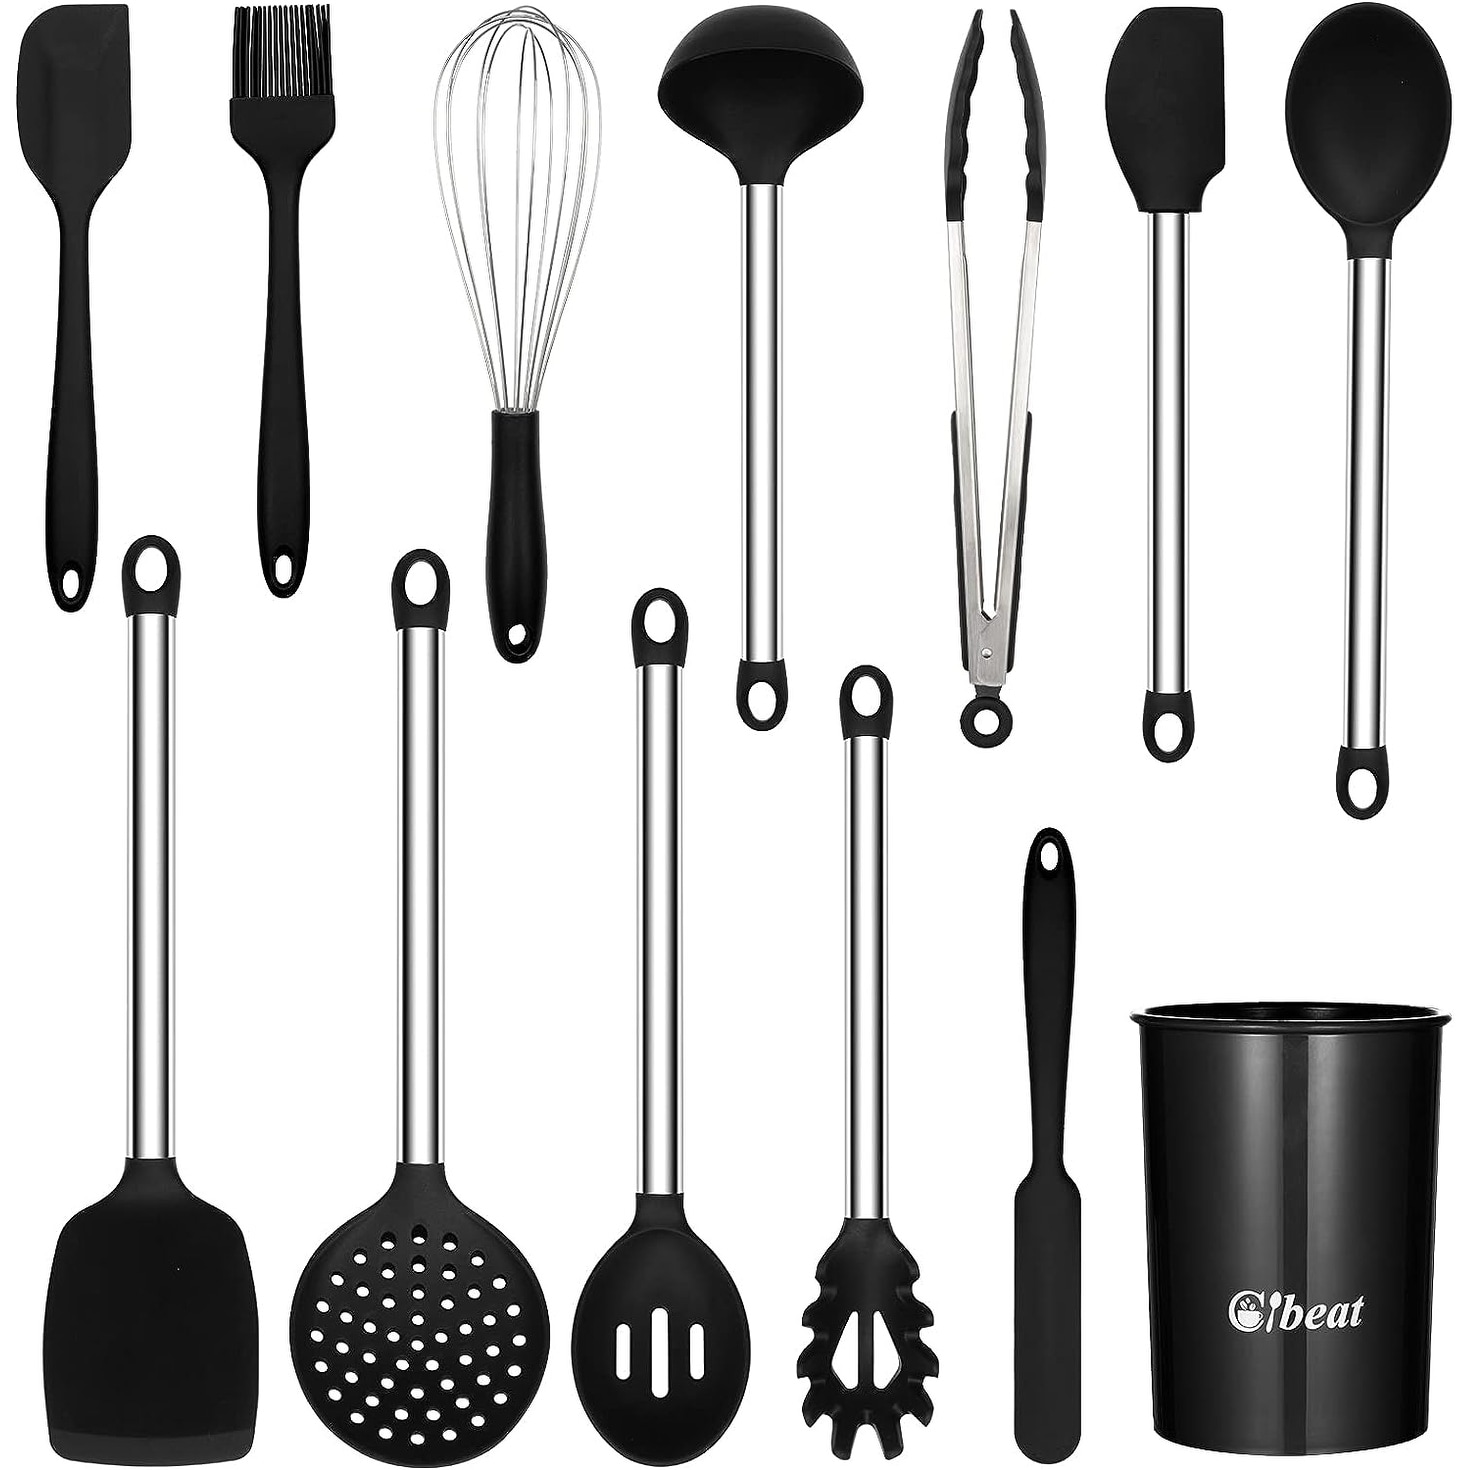 https://ak1.ostkcdn.com/images/products/is/images/direct/15327e3aaeb22b196a95f4e97d537f9ffb6779b6/Kitchen-Utensils-Set-with-Holder%2C-Silicone-Cooking-Utensils-Gadget.jpg